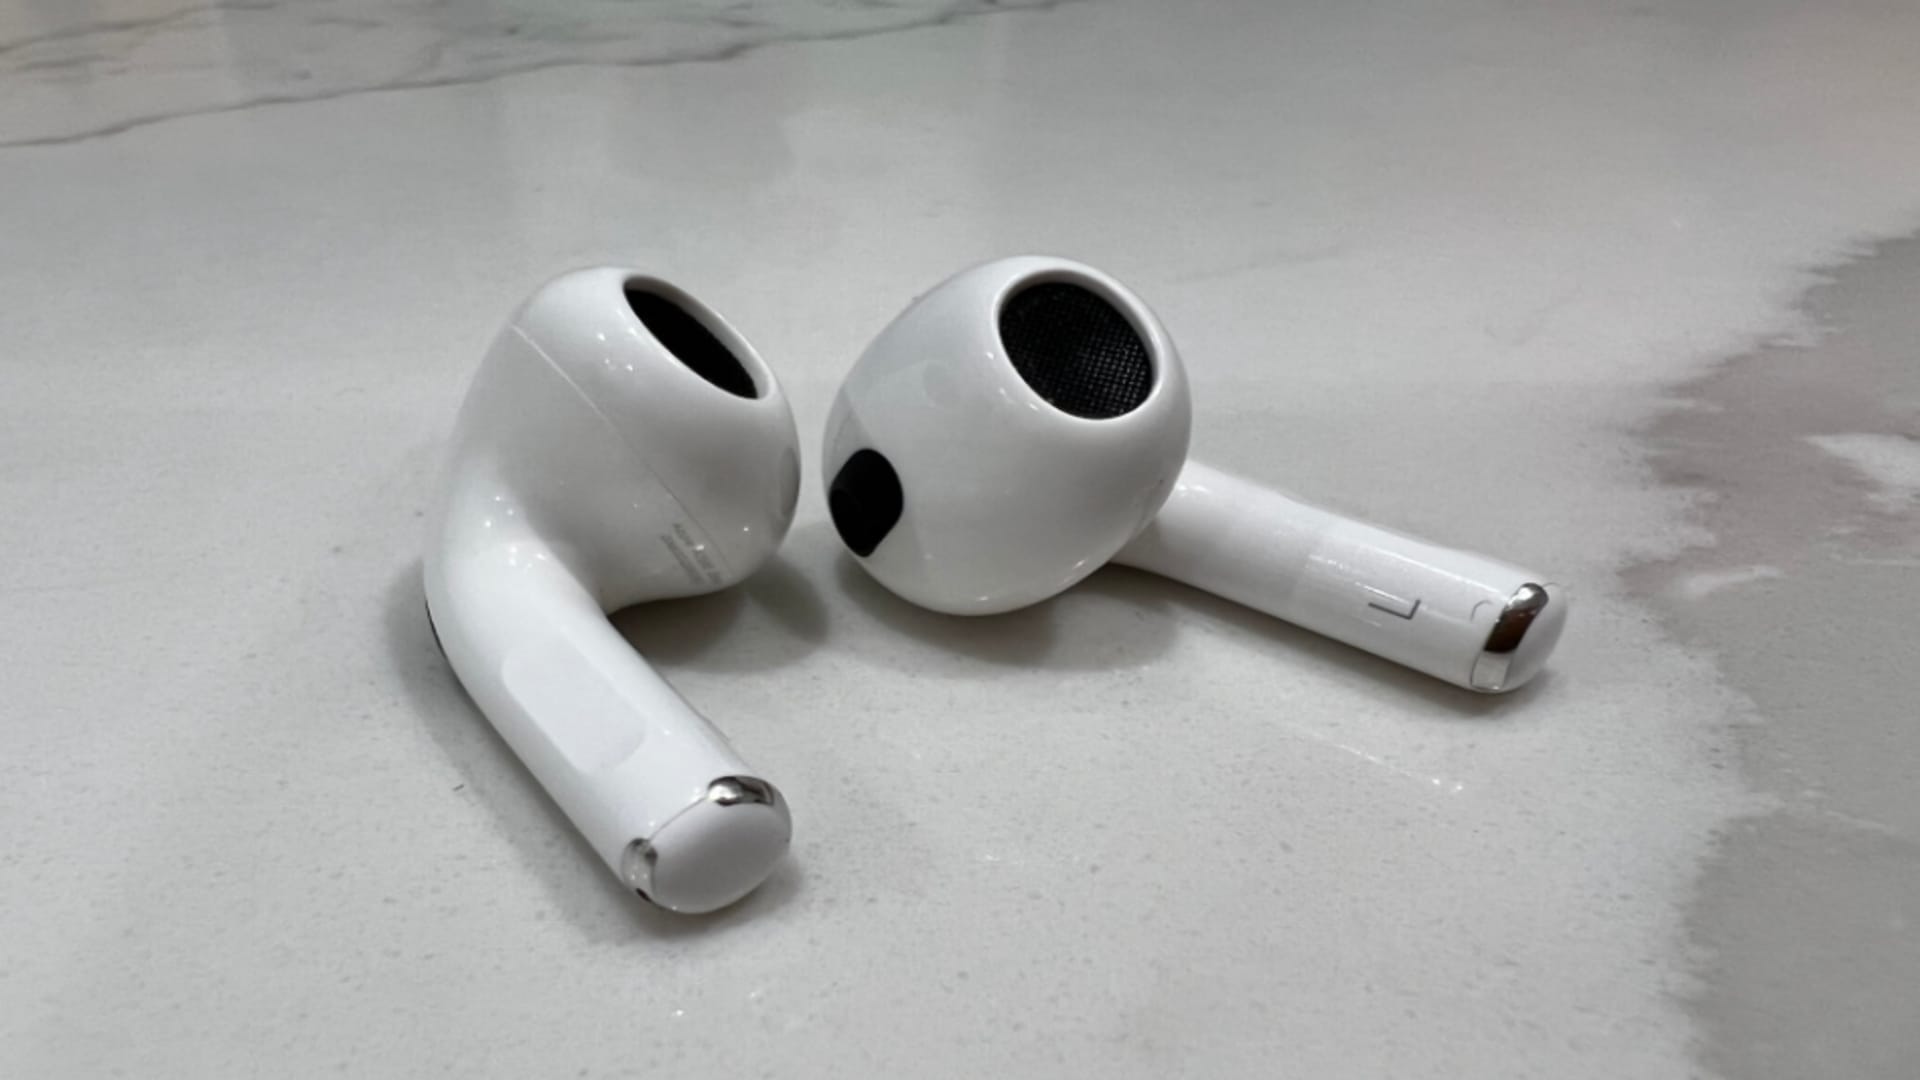 Apple reportedly in talks to make AirPods and Beats headphones in India